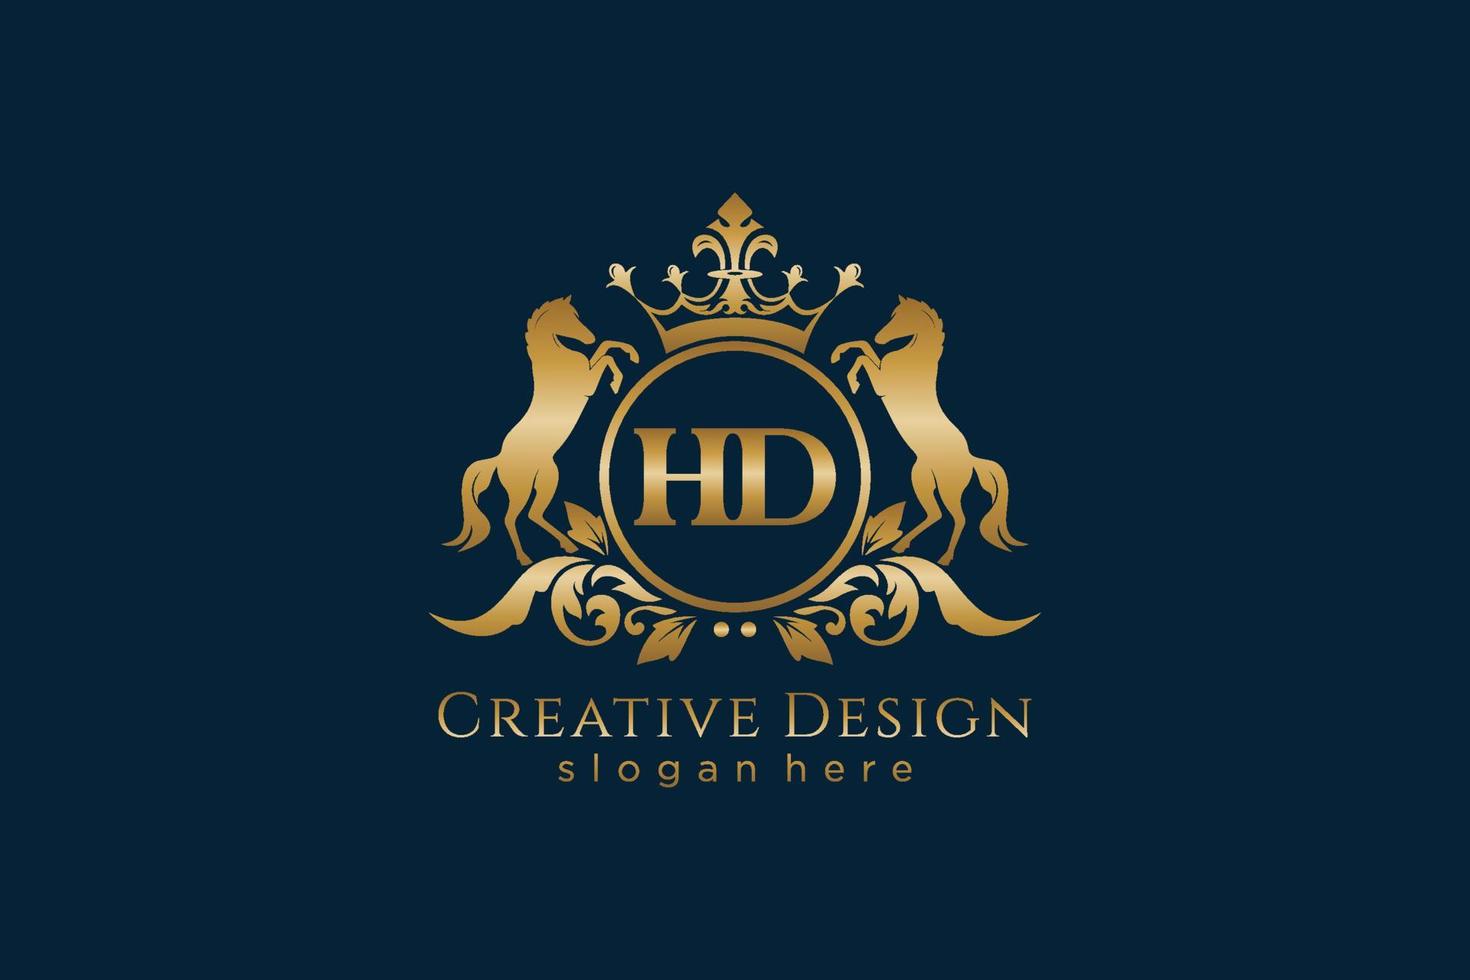 initial HD Retro golden crest with circle and two horses, badge template with scrolls and royal crown - perfect for luxurious branding projects vector